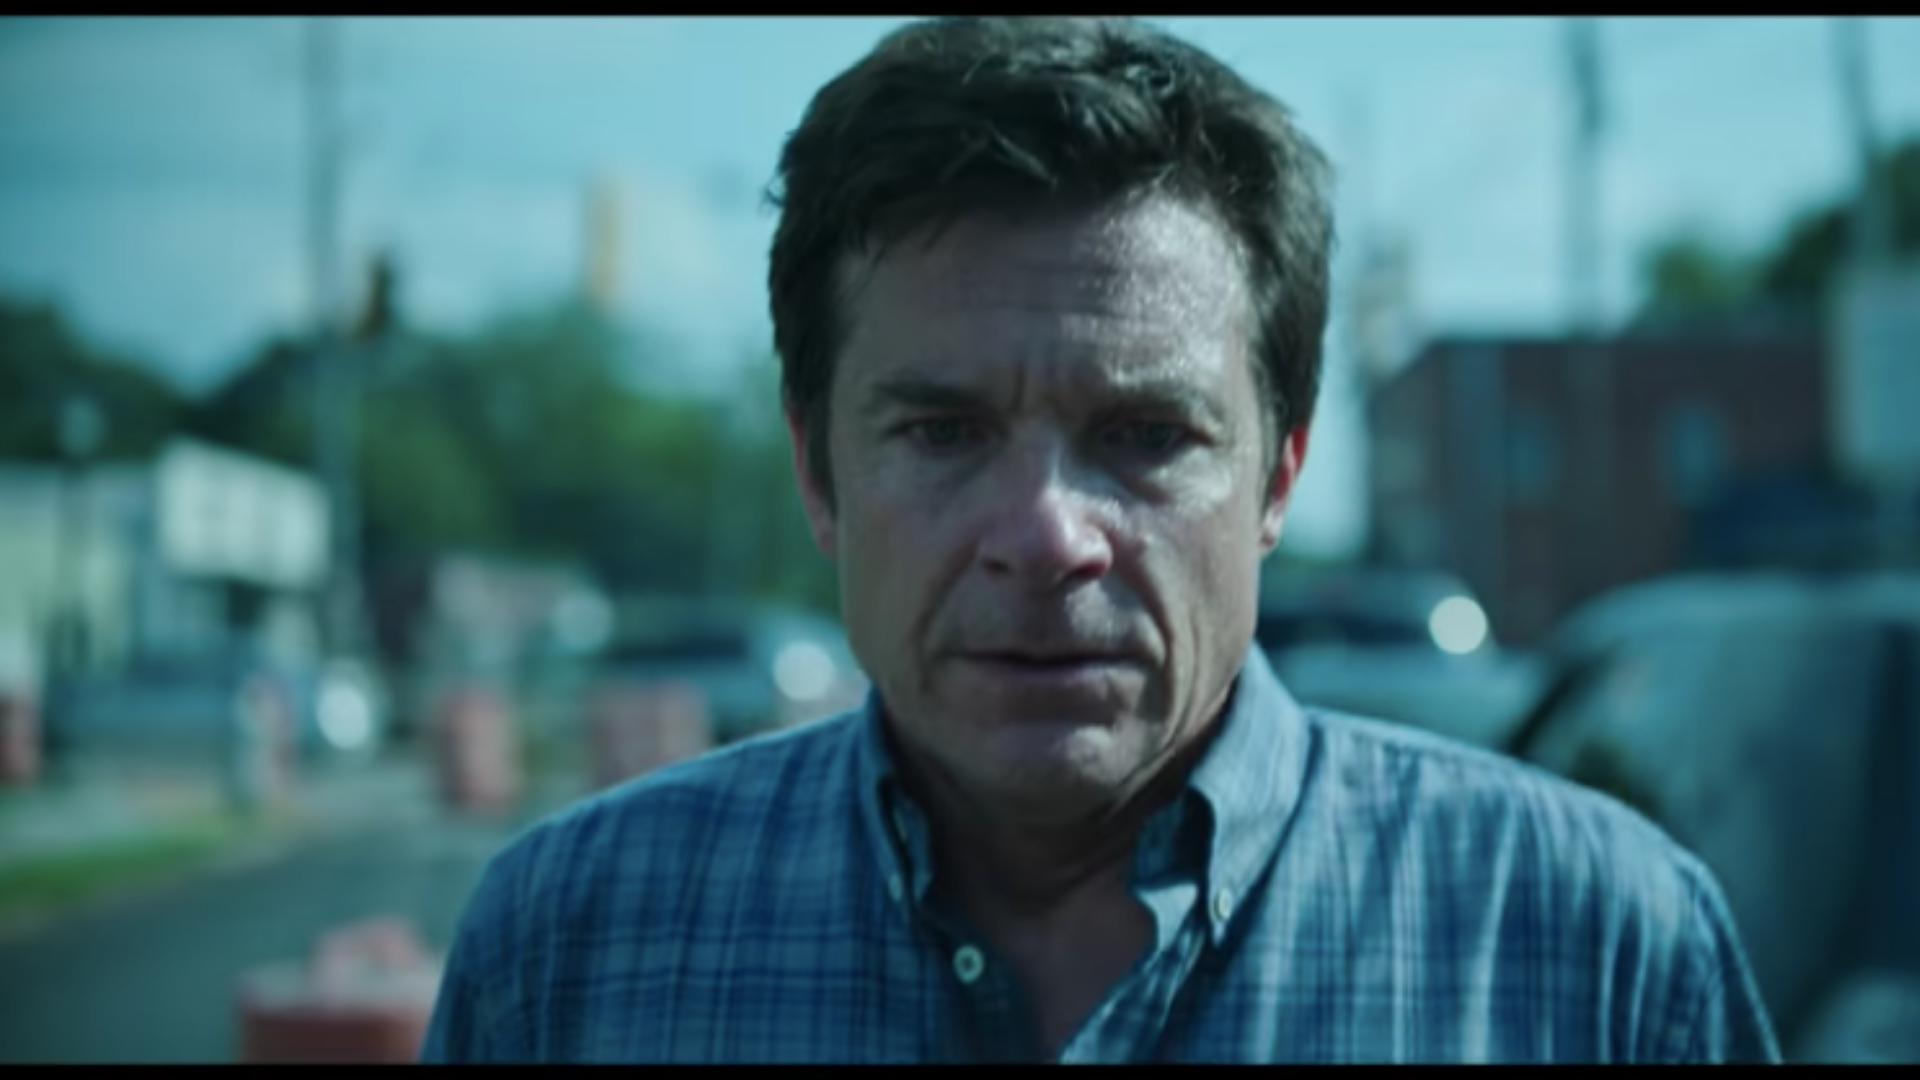 Ozark‘s dimly lit final season 4 trailer asks if the end justifies the means